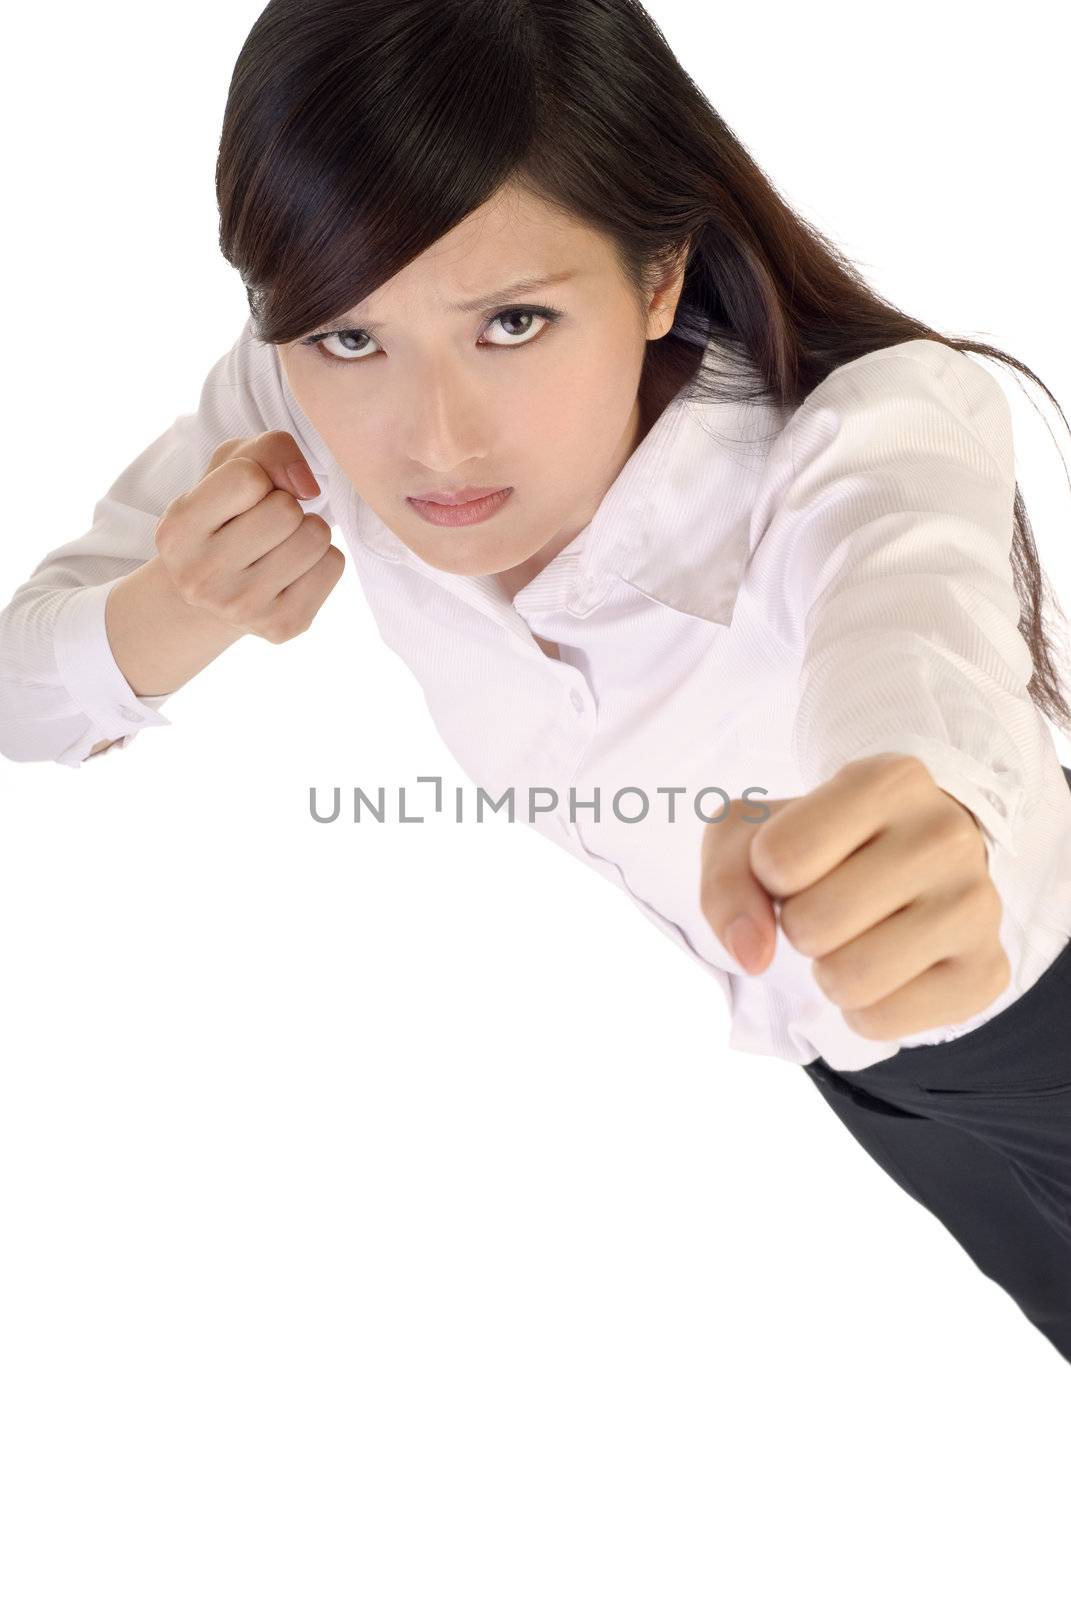 Business woman fighting pose on white background.